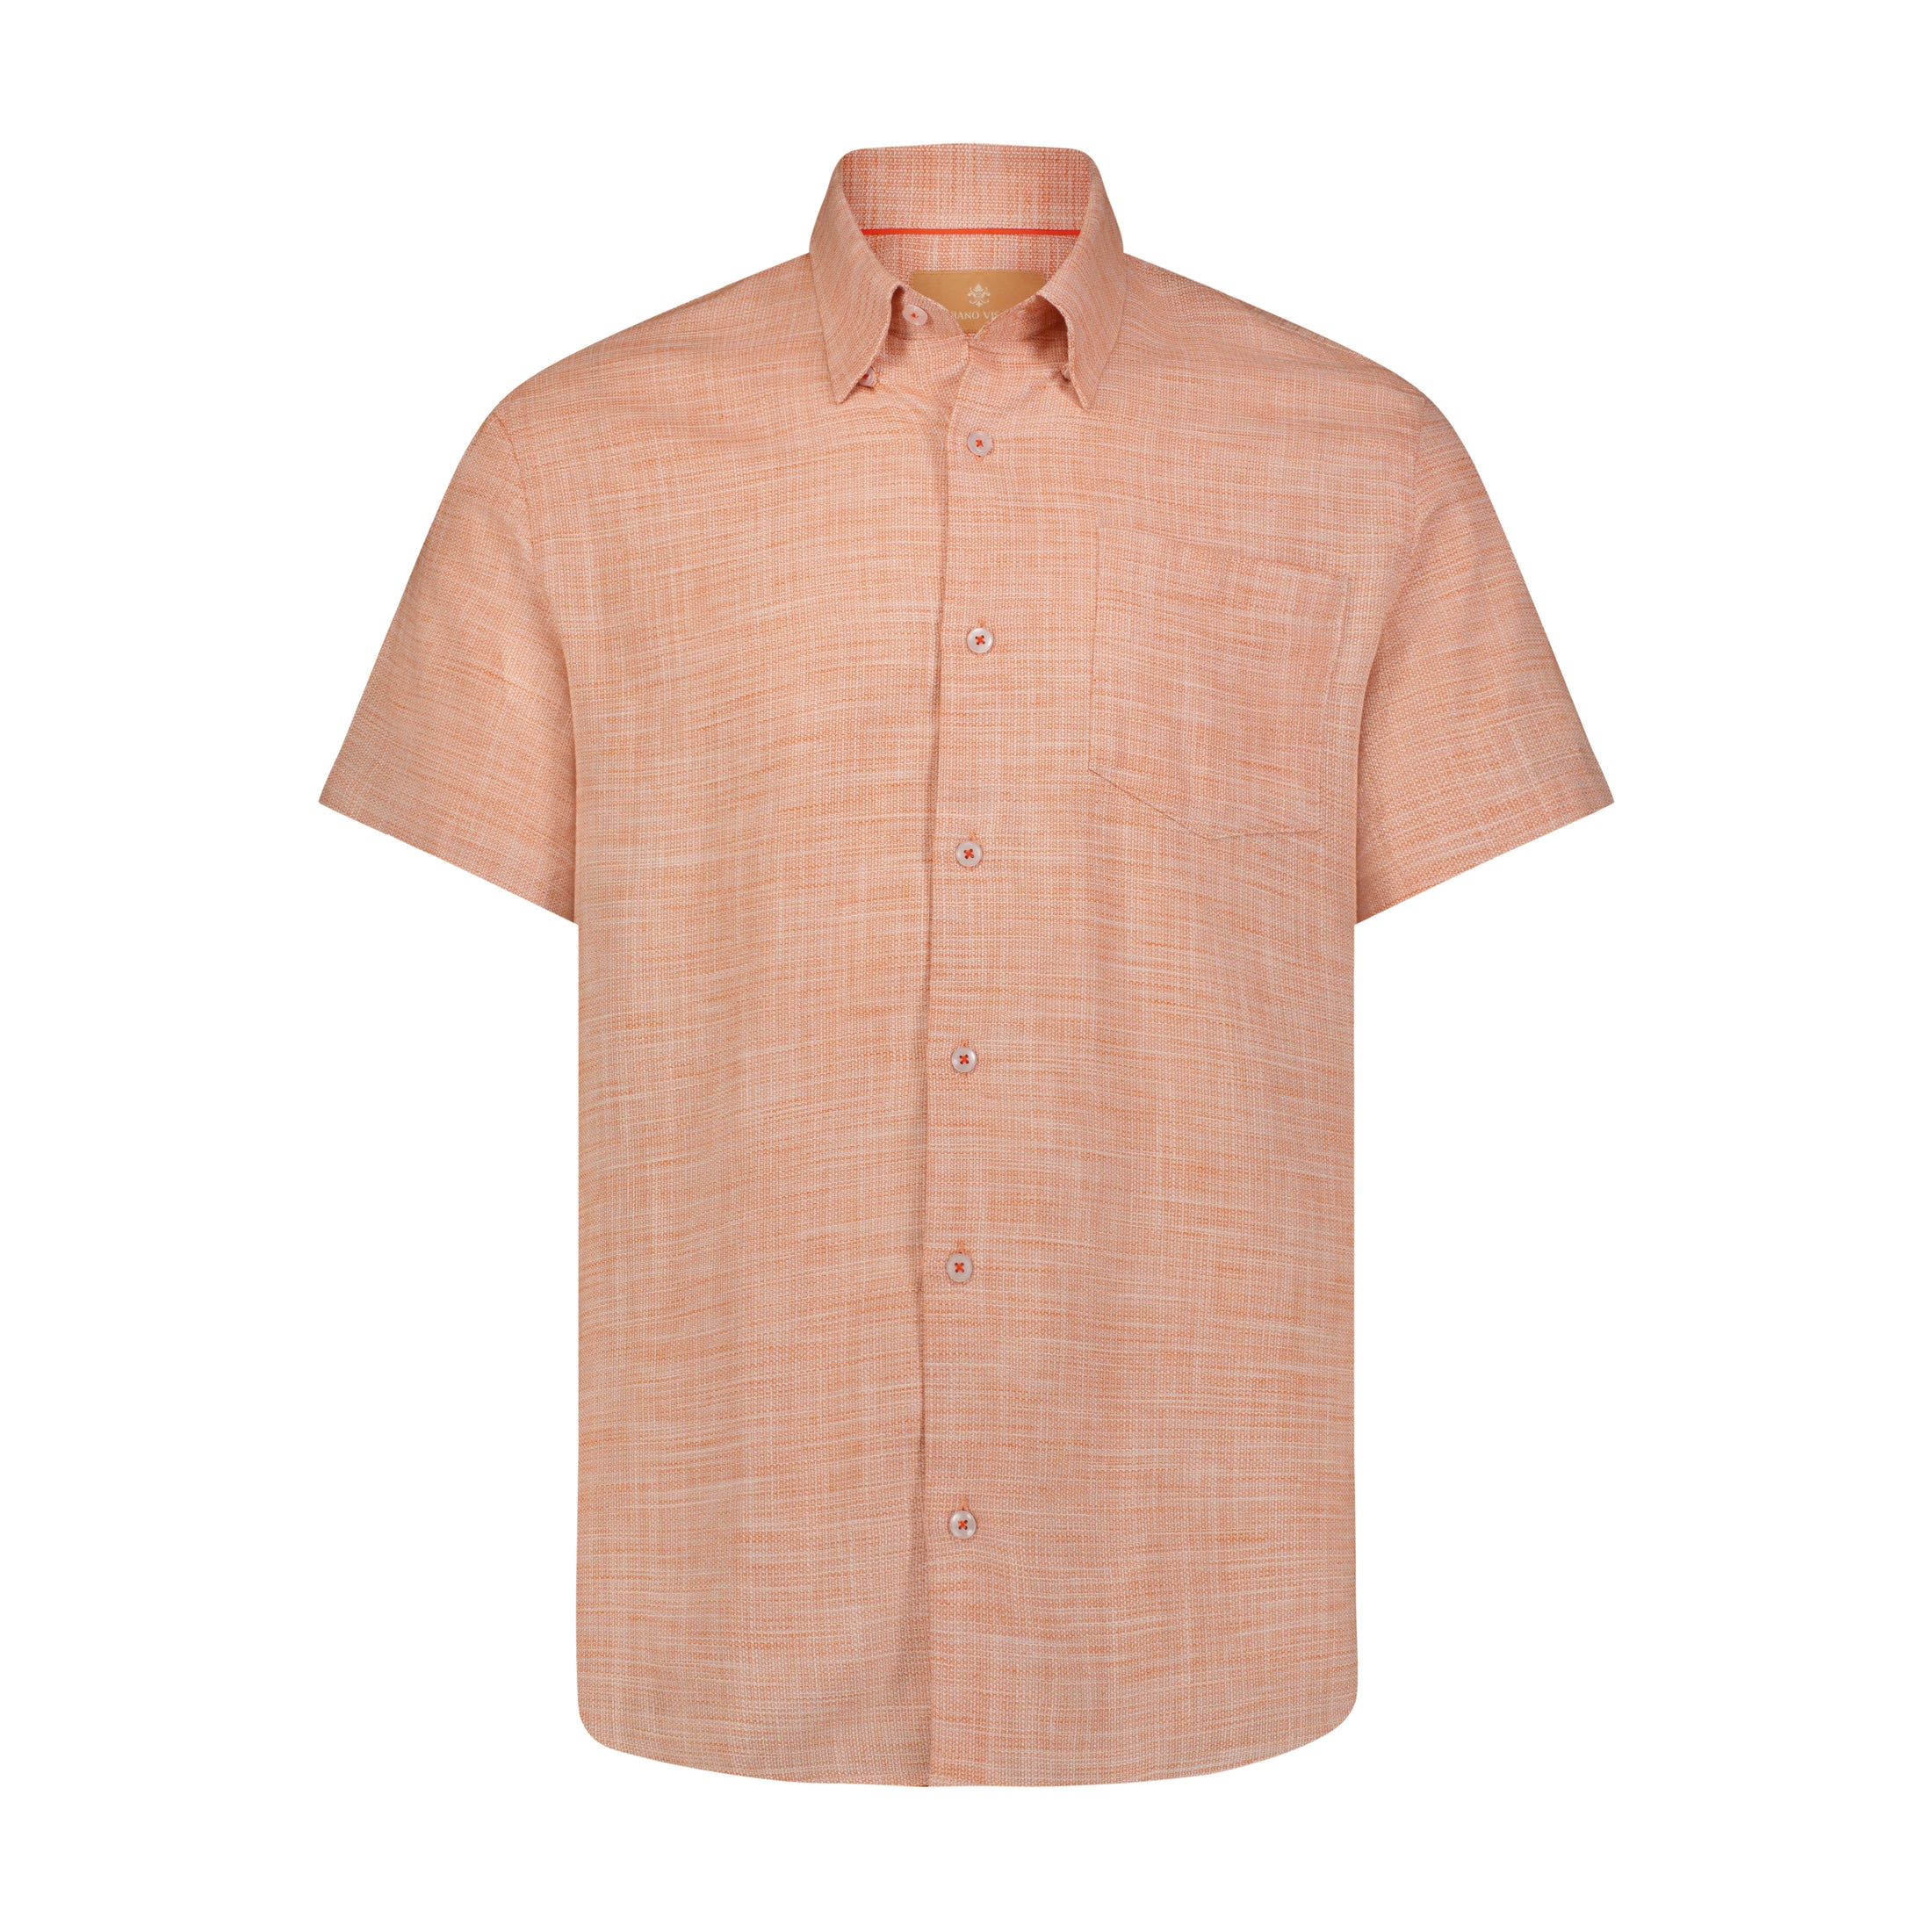 Peach and White Heather Short Sleeve Woven Weave Shirt